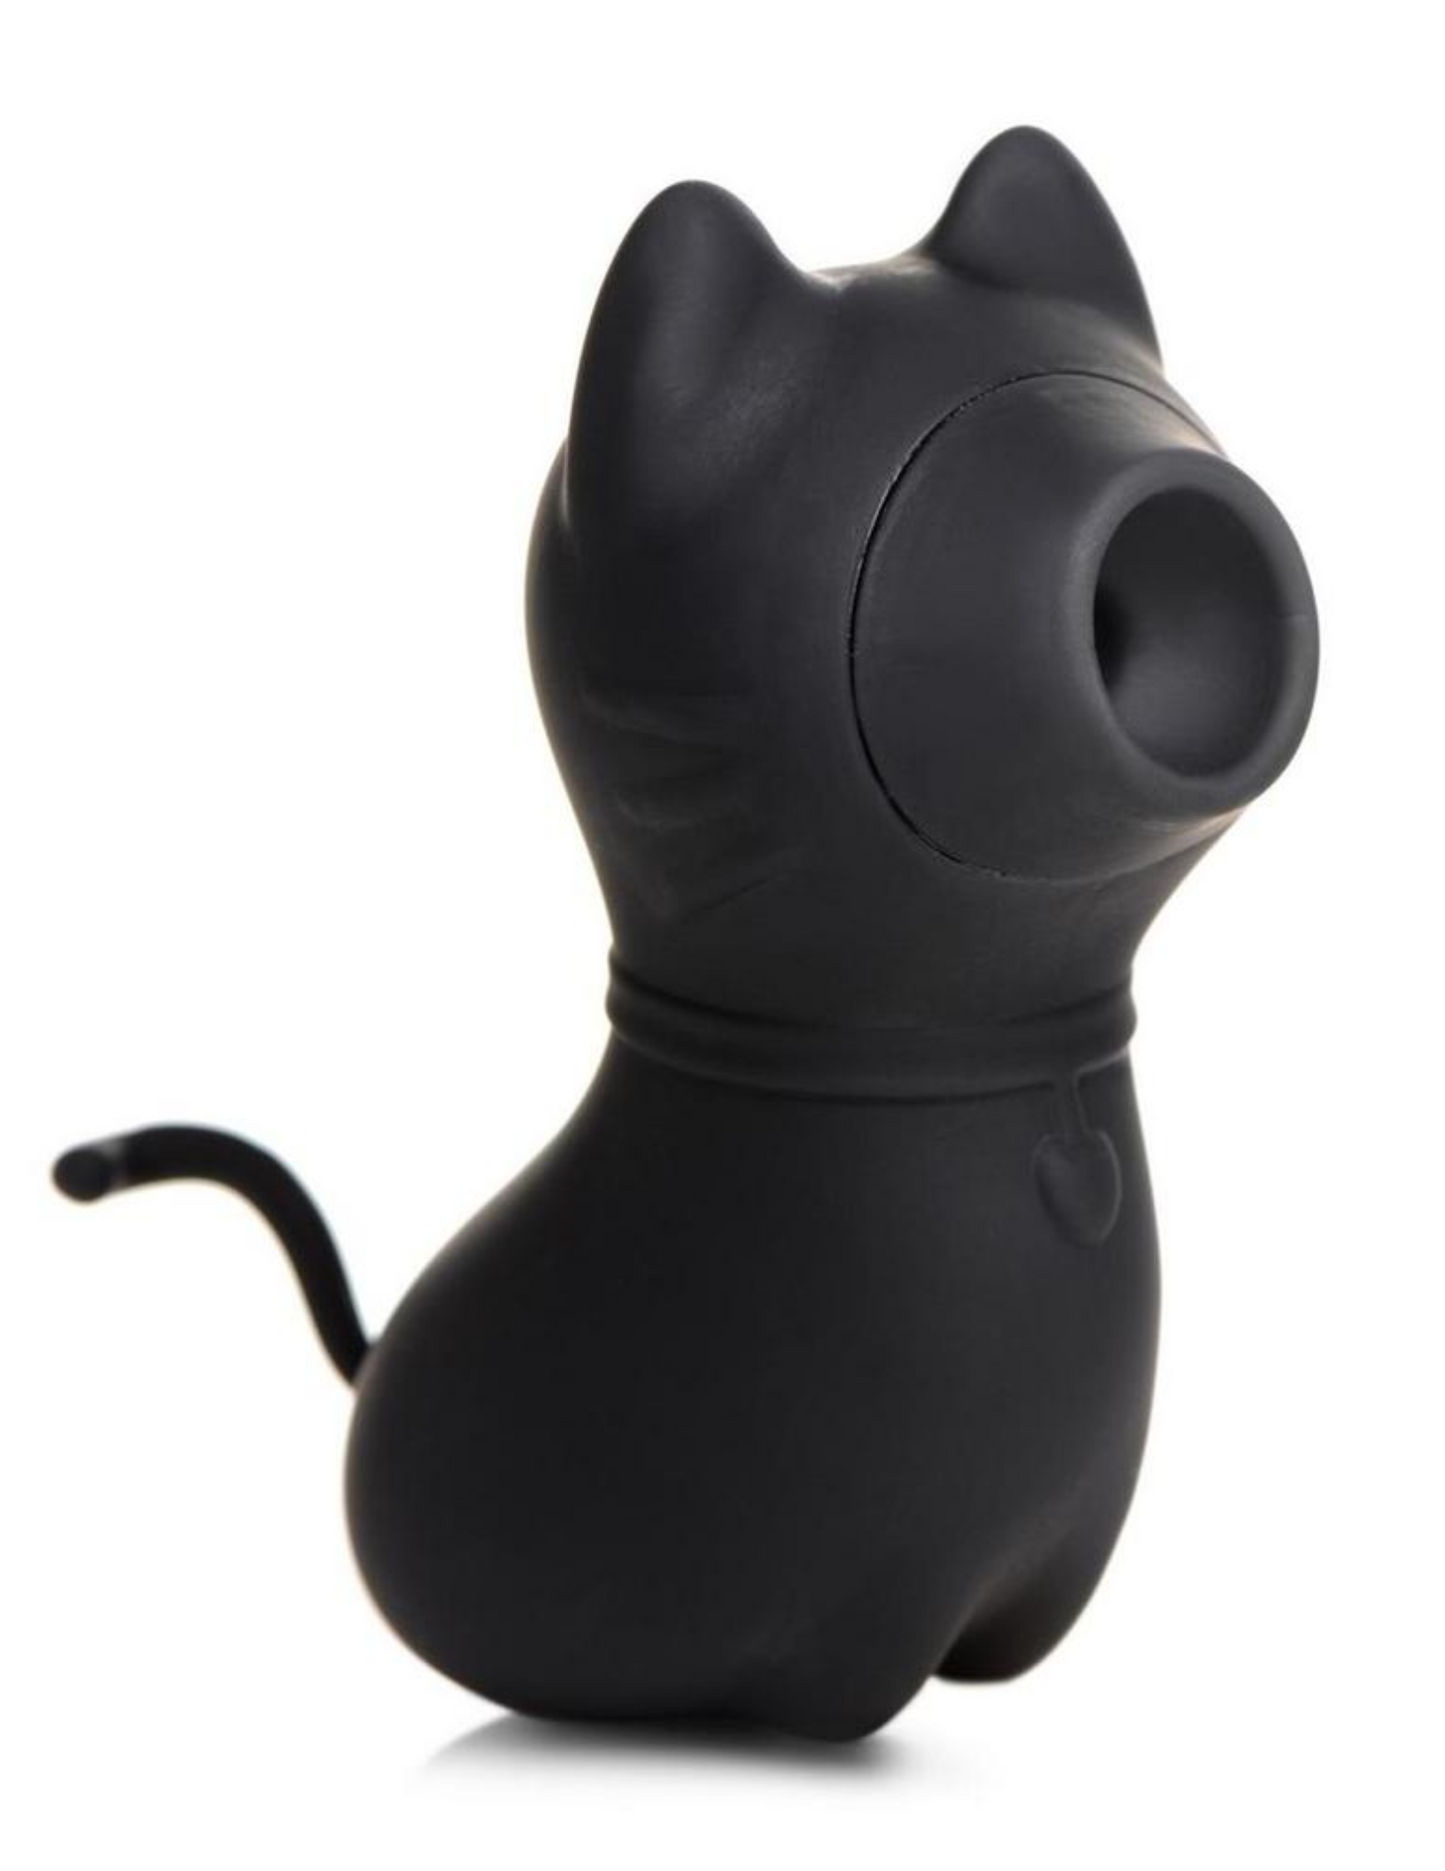 Close-up of the Shegasm Sucky Kitty Clitoral Stimulator from XR Brands (black) shows off its suction mouth and petite size.